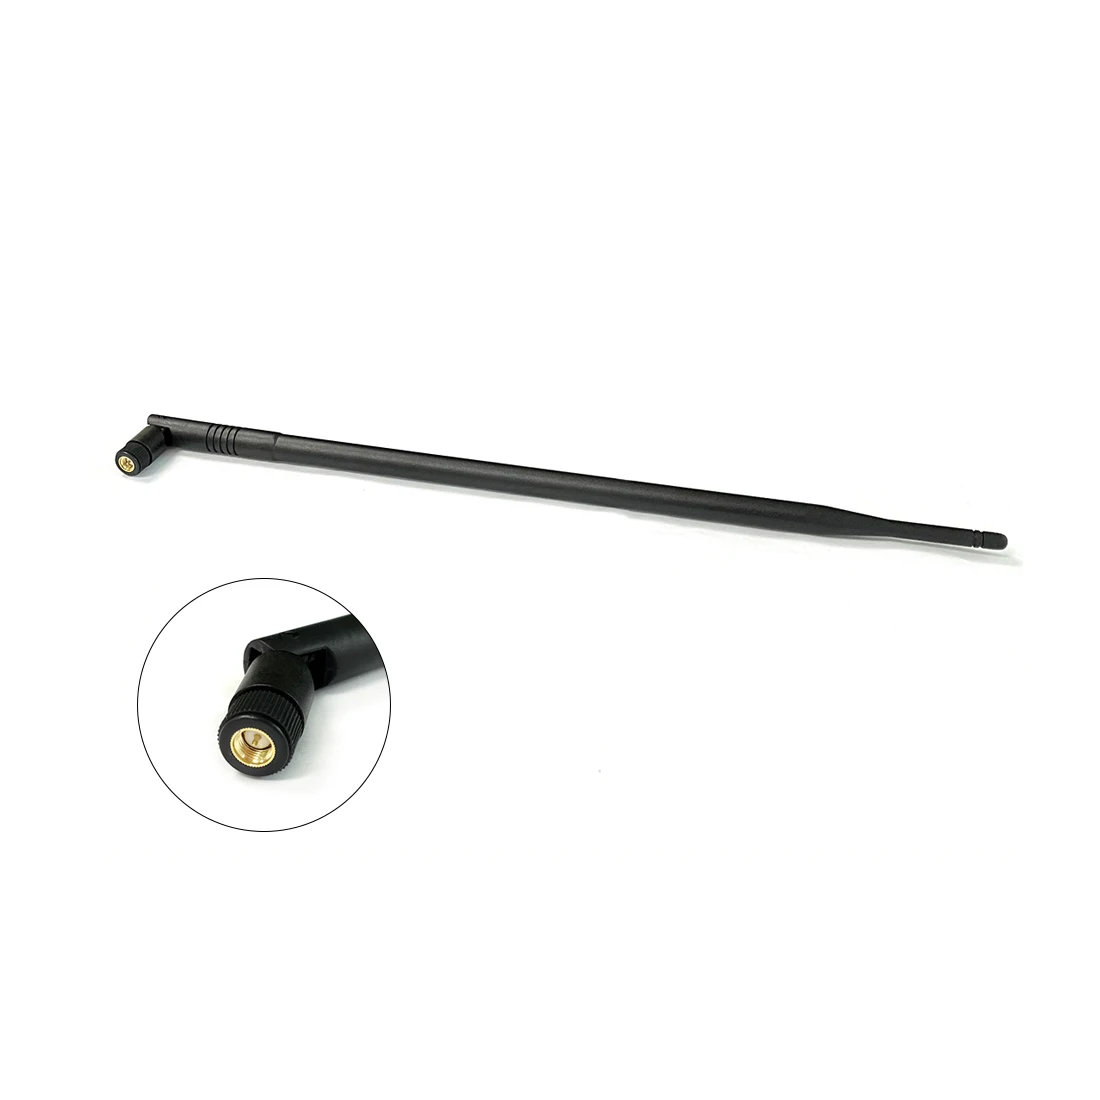 

1pc Wifi Antenna 2.4Ghz 10dbi High Gain Omni-Direction Signal Enhance Strengthen Aerial SMA Male Connector New Wholesale